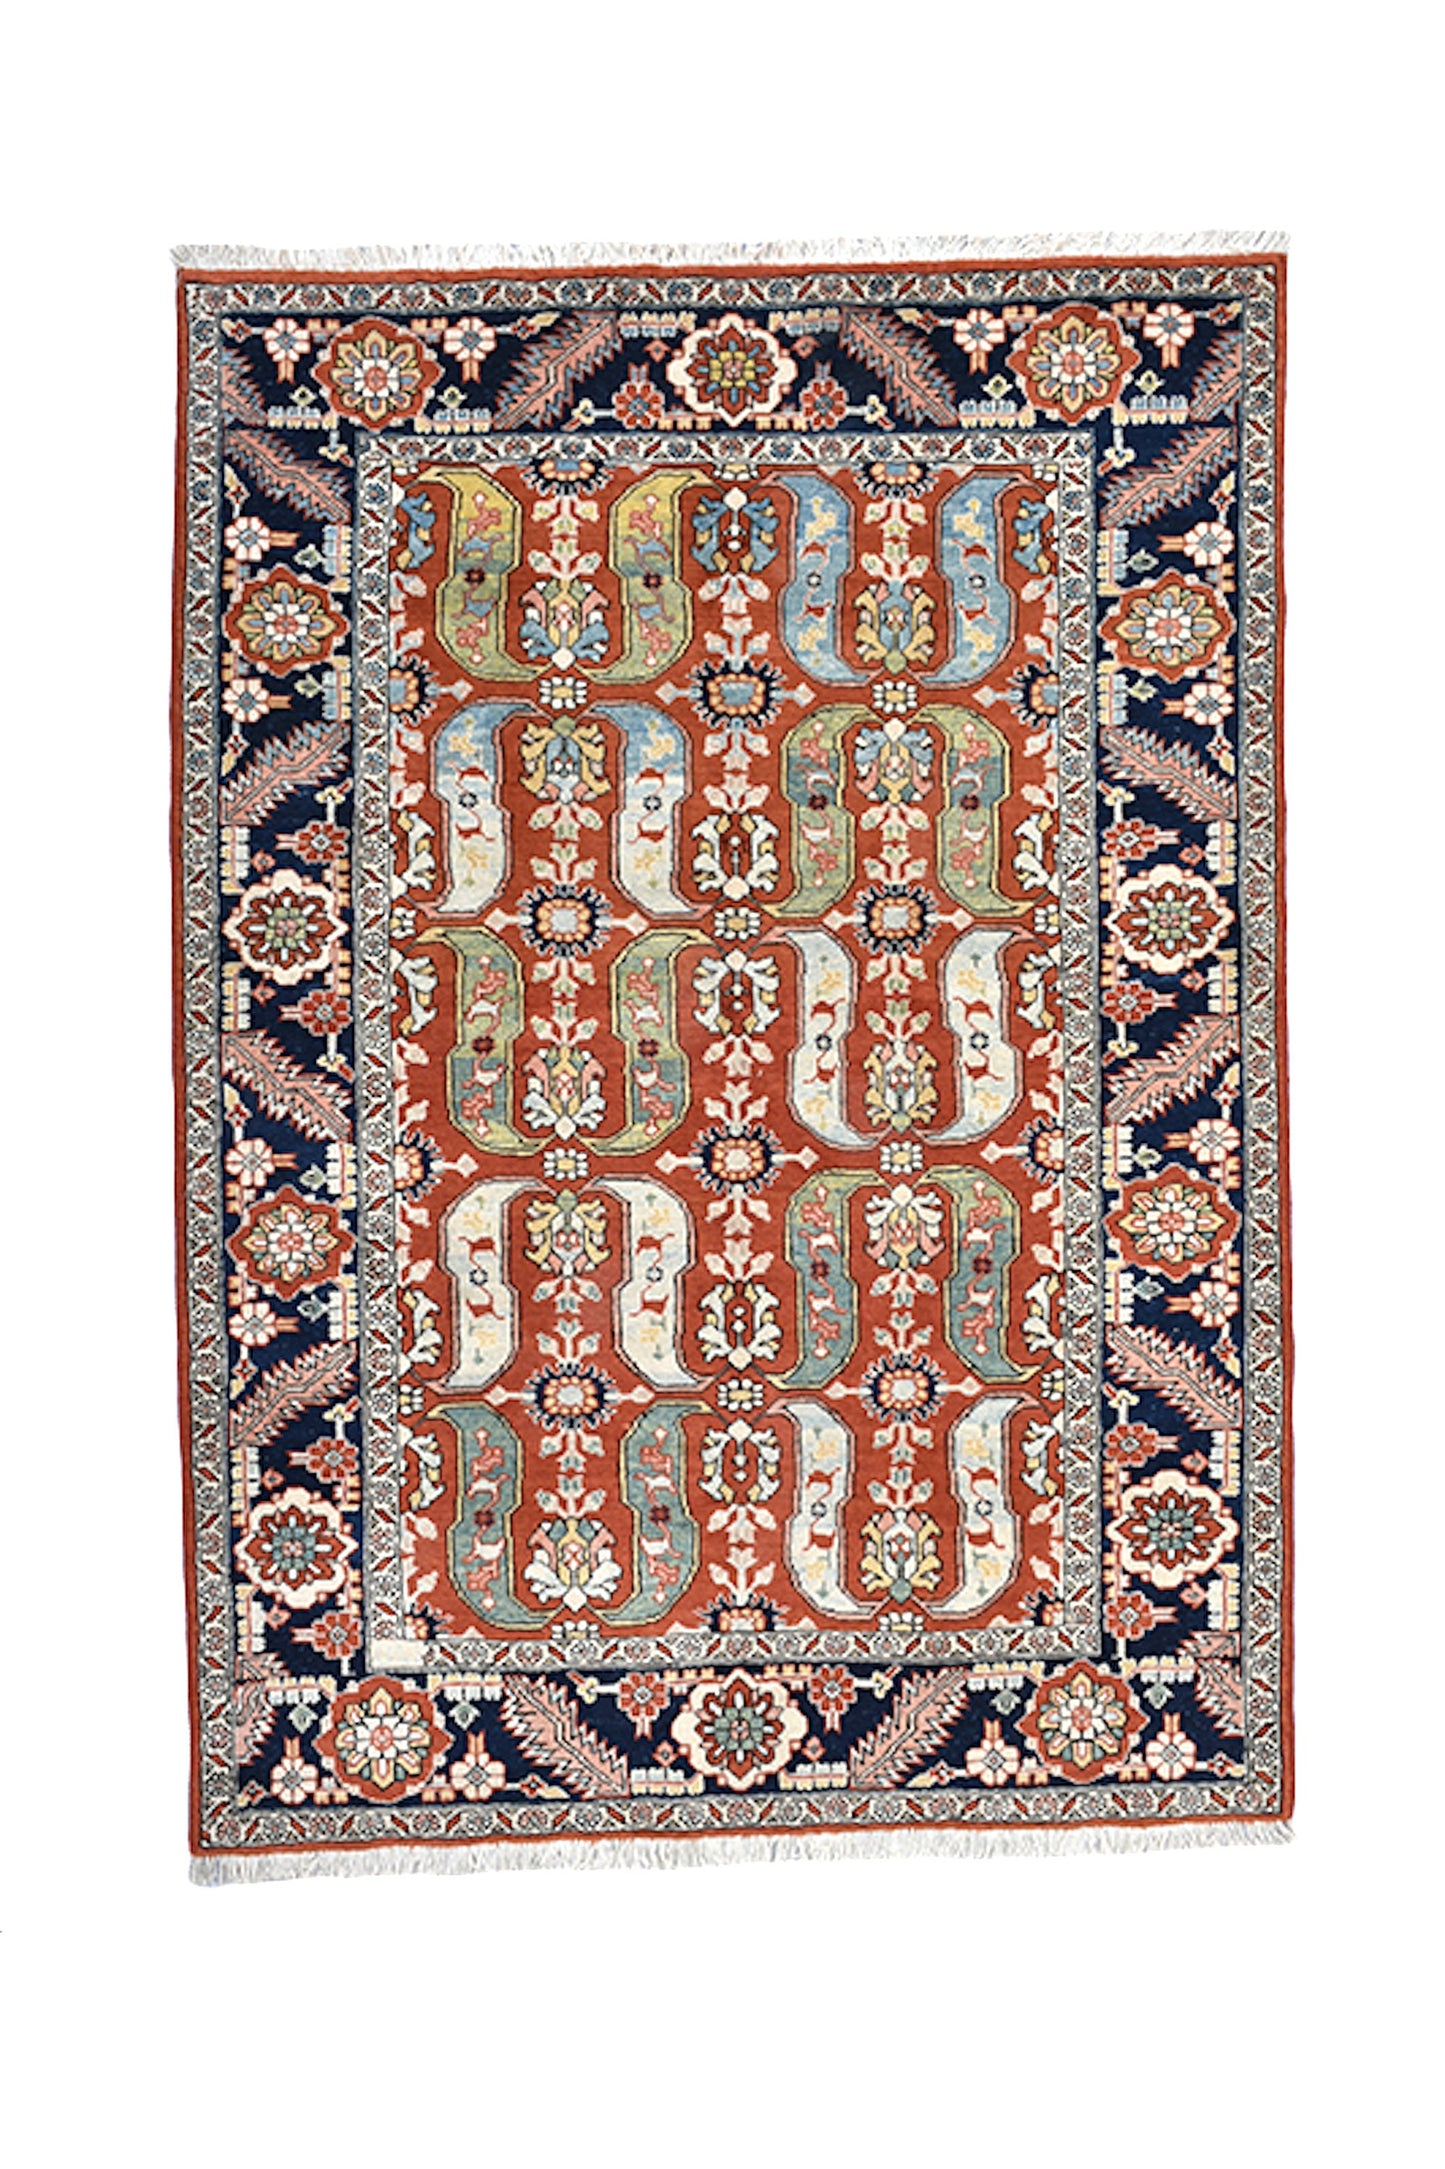 Orange Blue Oriental 6x8 Antique Rug | Accent One of a Kind Living Room Rug with Persian Motifs and Navy Blue Border